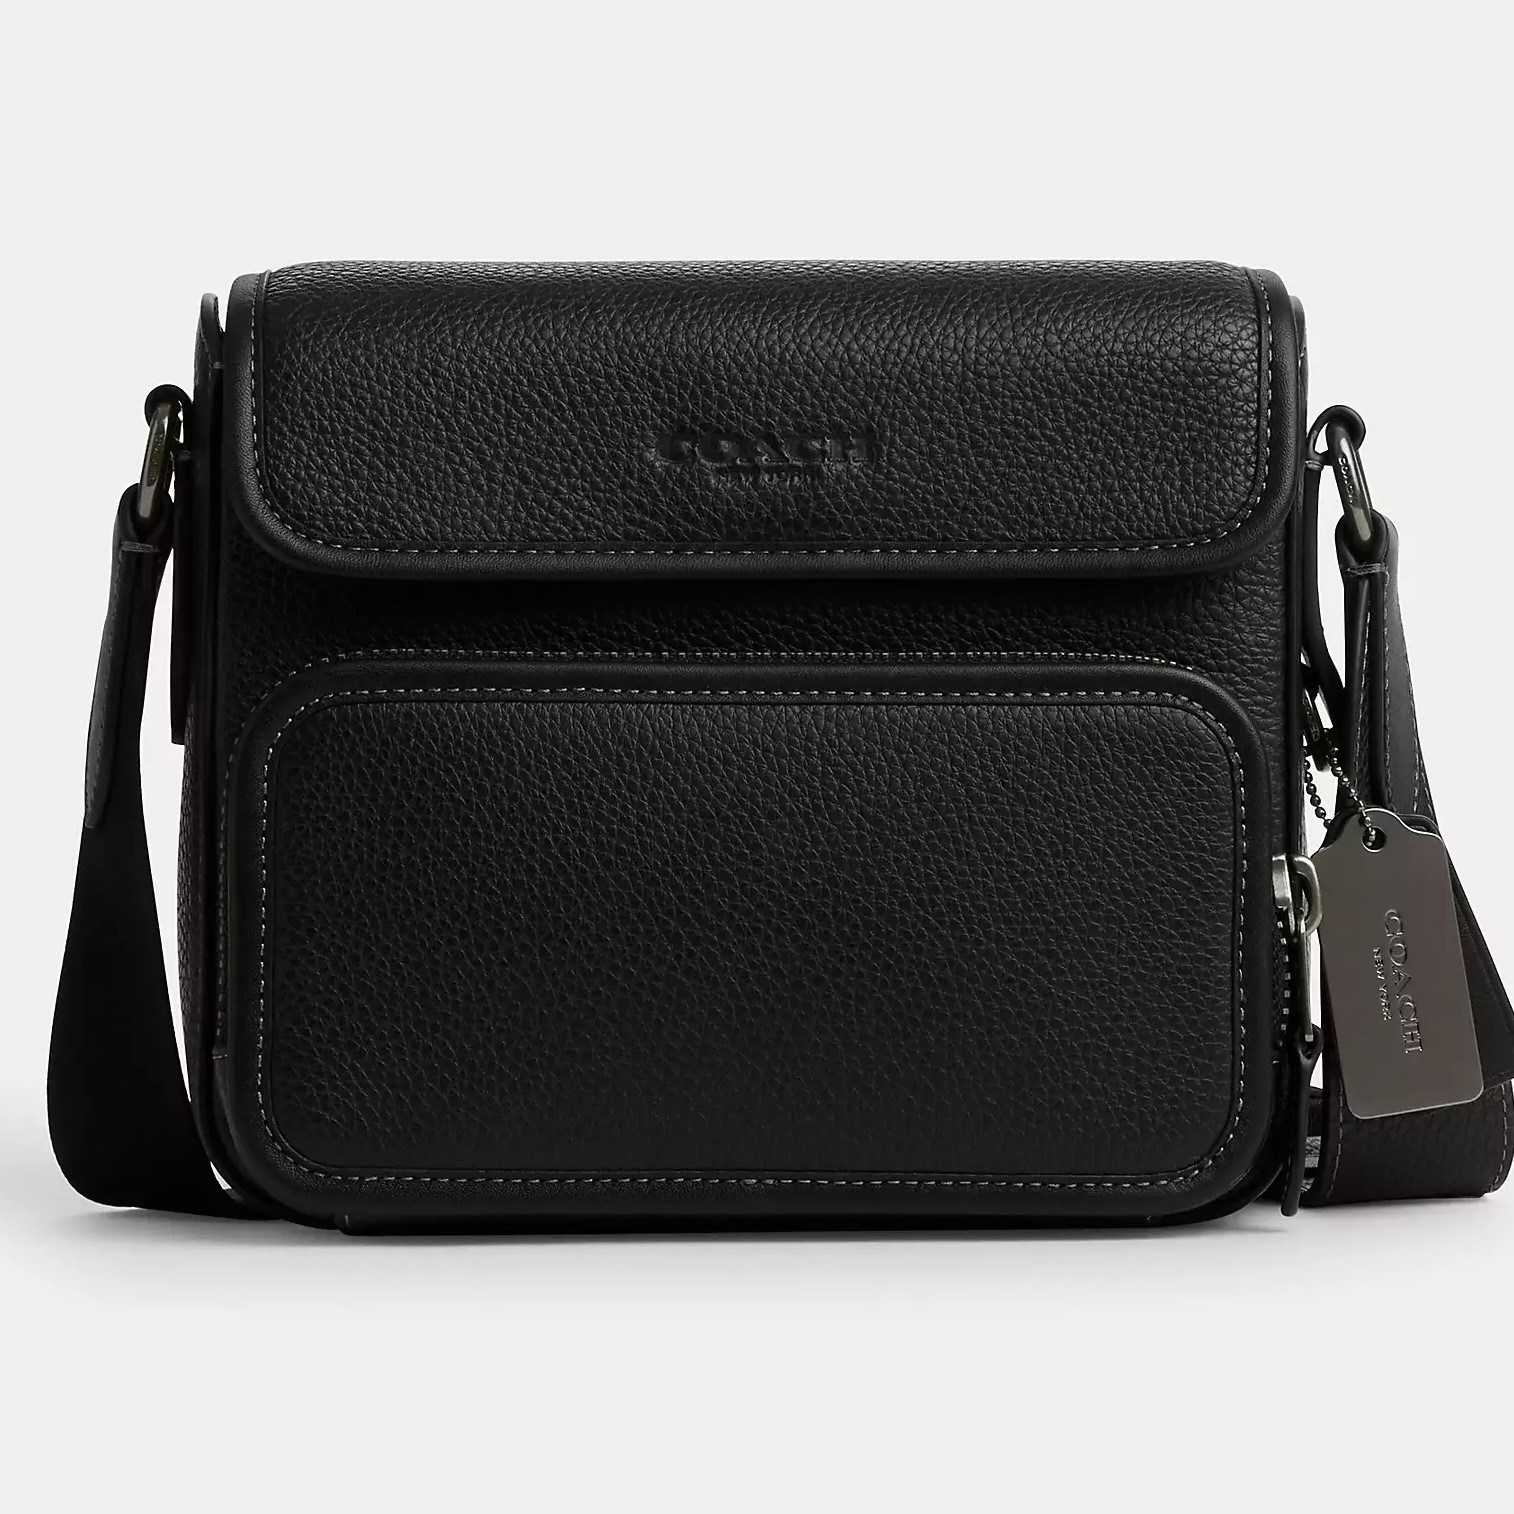 TÚI COACH NAM SULLIVAN FLAP CROSSBODY IN BLACK REFINED PEBBLE LEATHER AND SMOOTH CALF LEATHER CN729 3